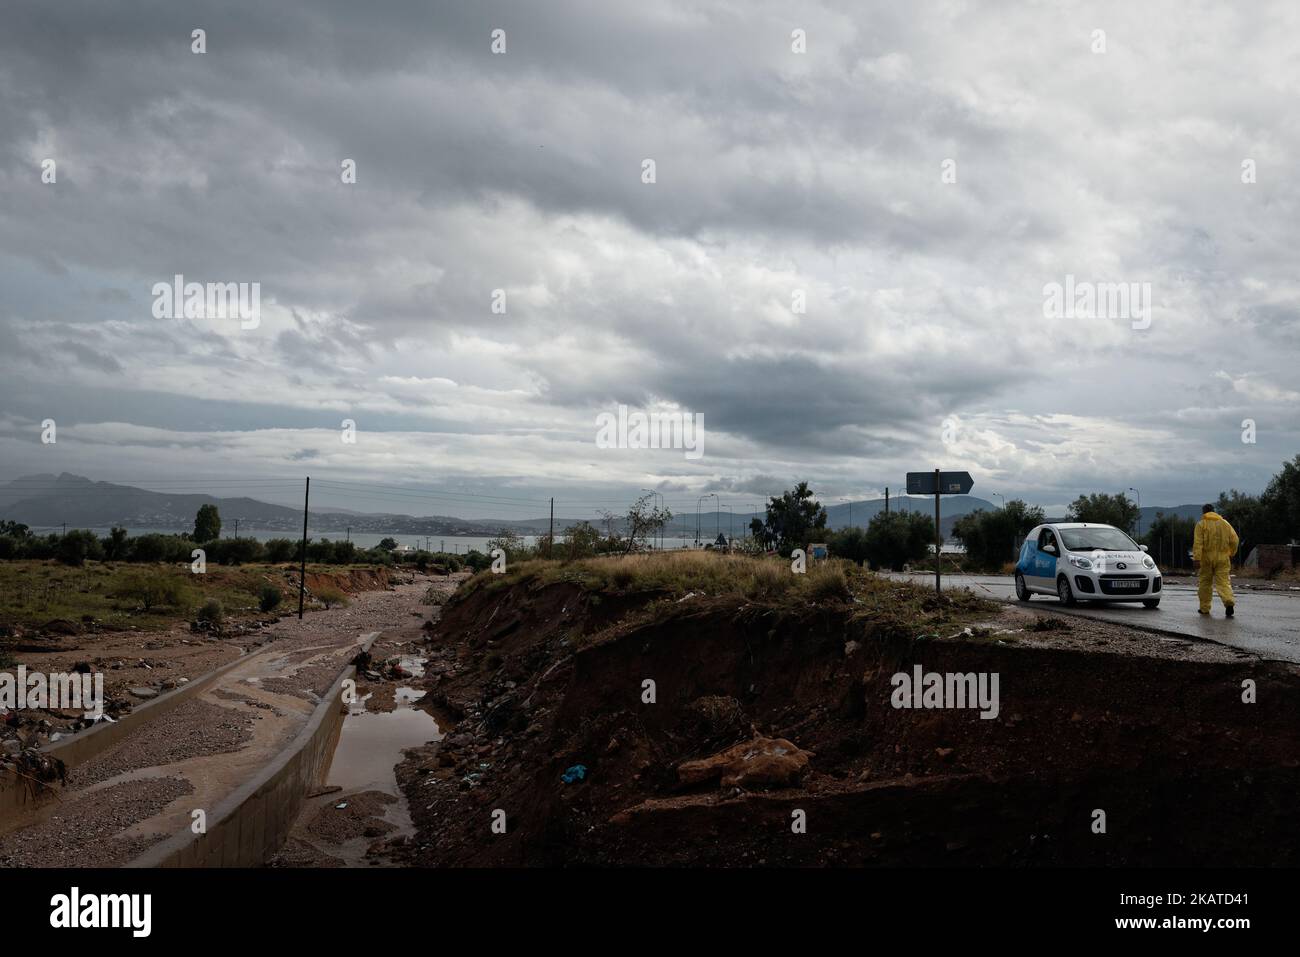 Damages caused by floods are seen on the road near Nea Peramos, Greece on November 17, 2017. Flash floods have killed 16 people causing 'biblical damage' as fast-flowing torrents of red mud flooded roads in the western outskirts of the Greek capital, Athens. (Photo by Gerasimos Koilakos/NurPhoto) Stock Photo